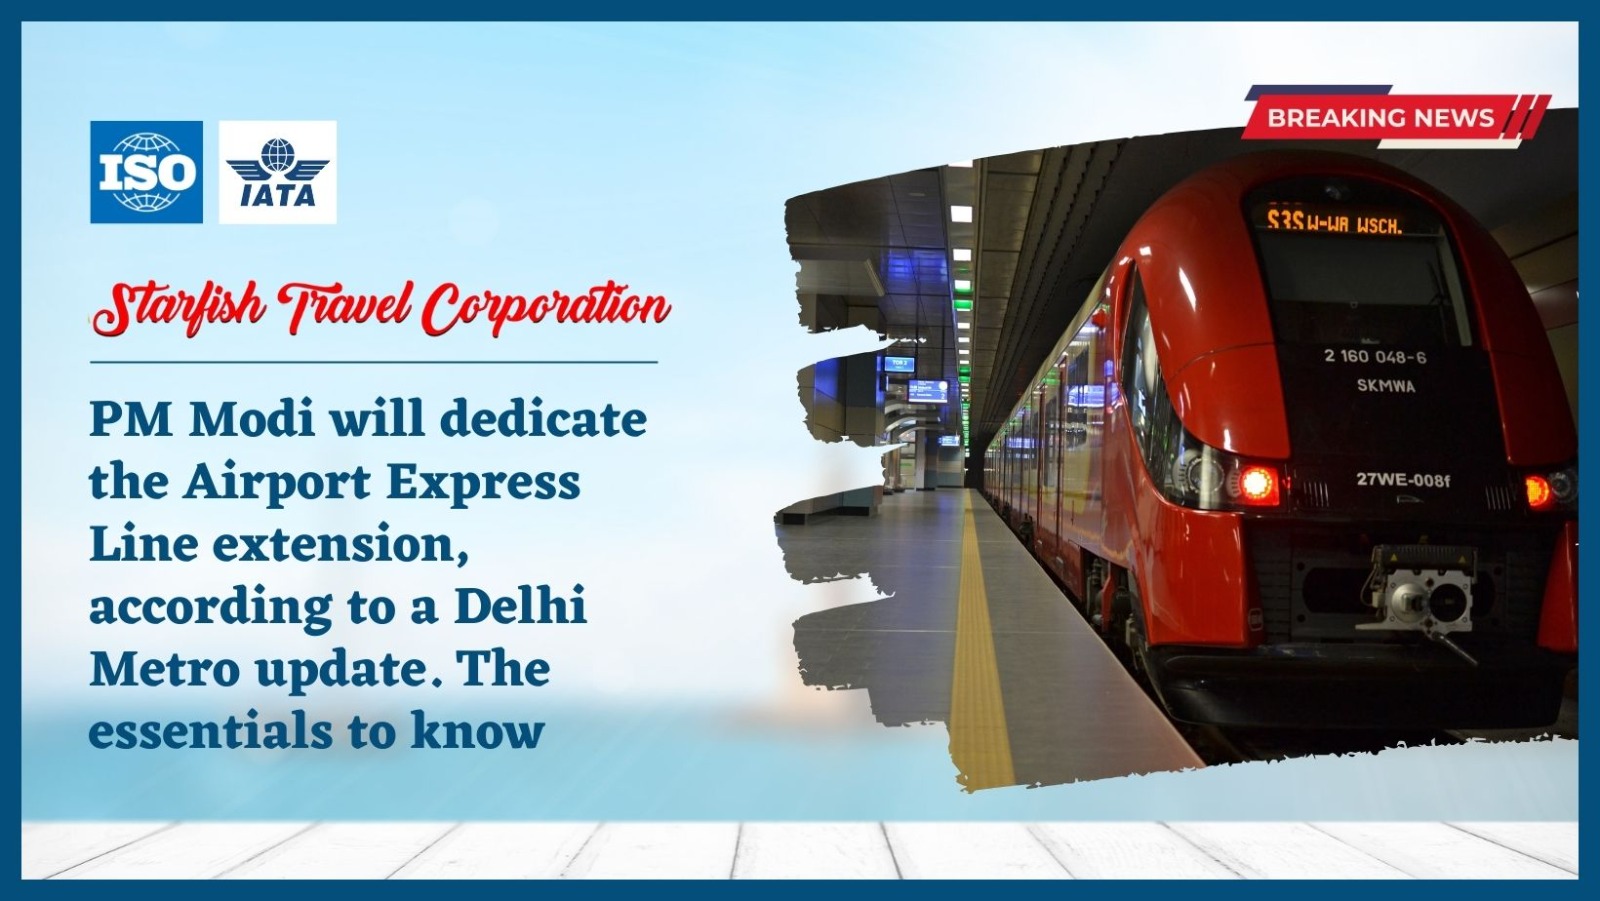 PM Modi will dedicate the Airport Express Line extension, according to a Delhi Metro update. The essentials to know